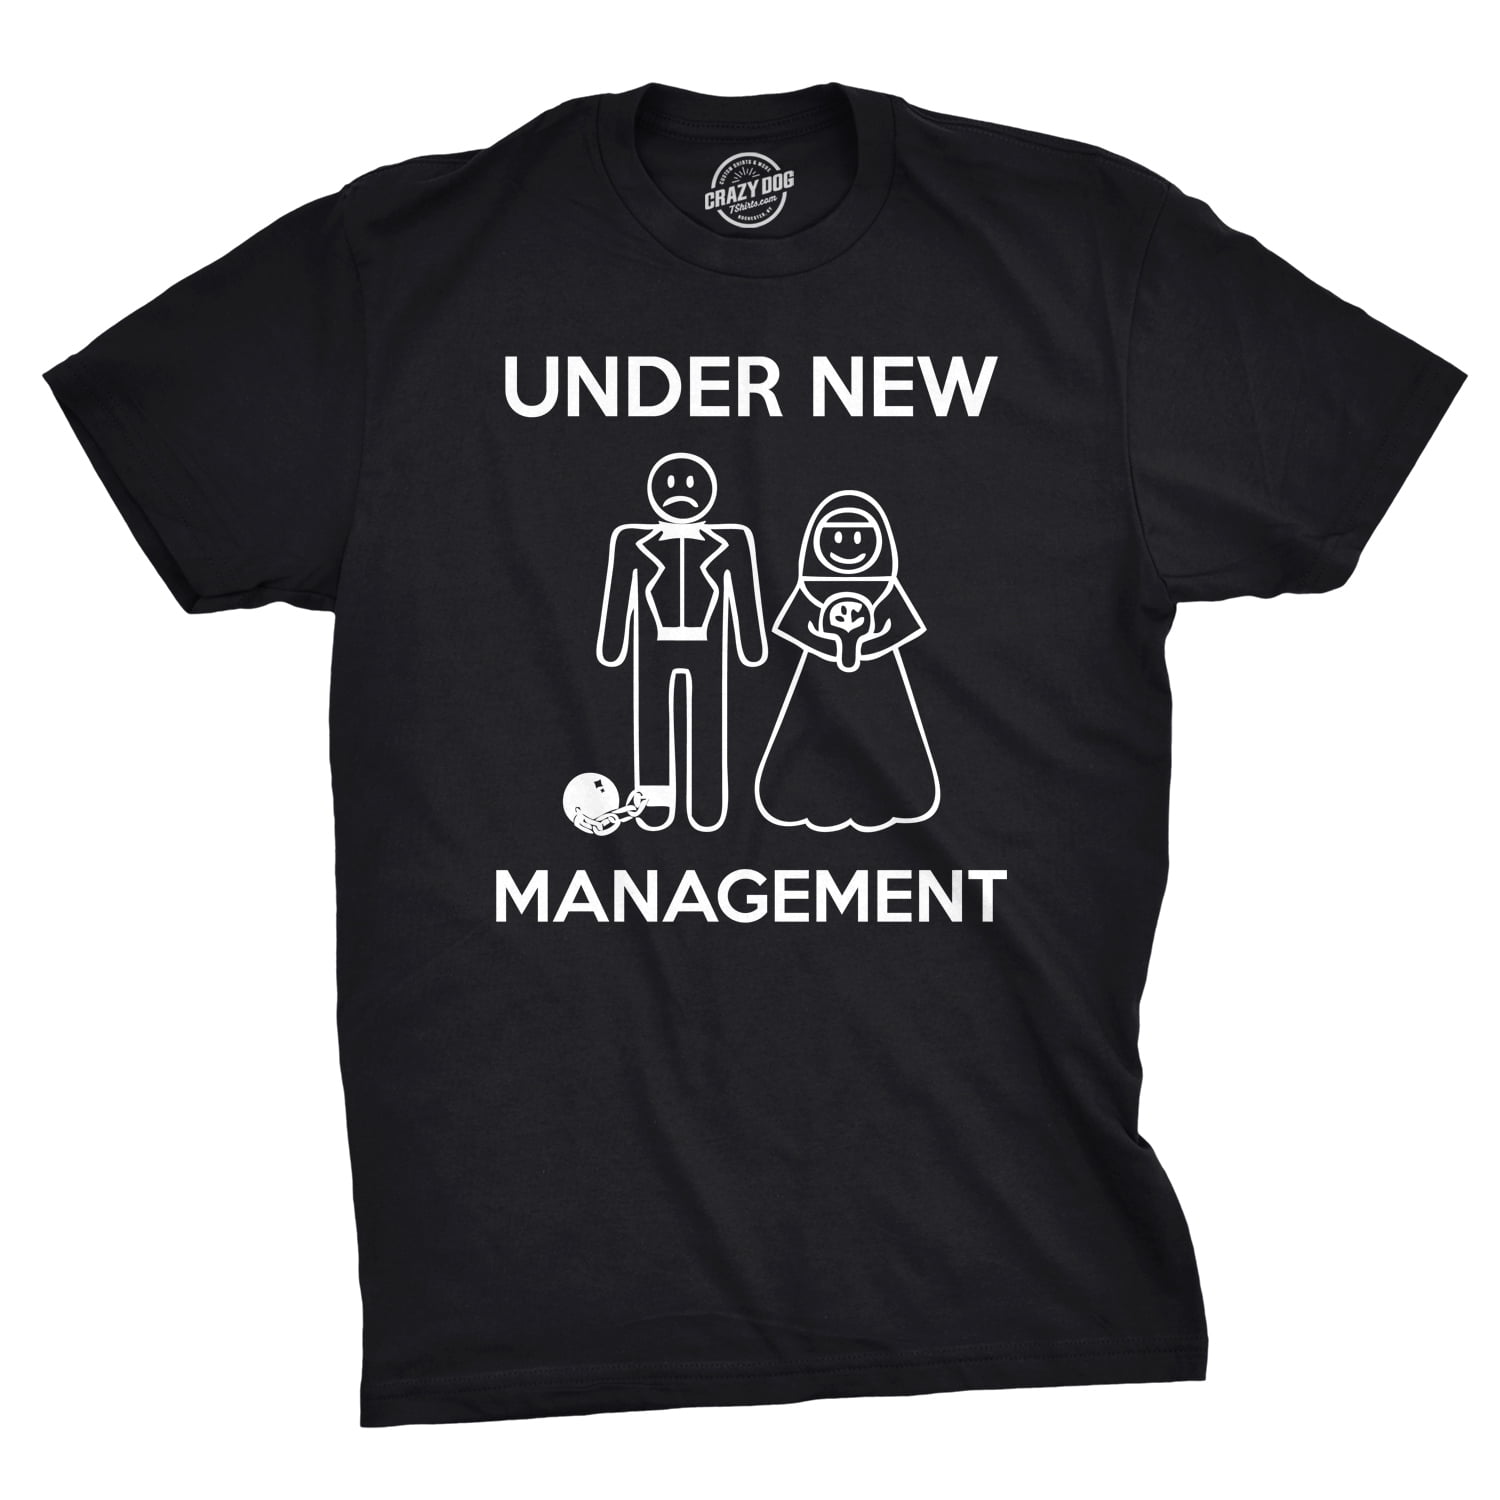 Camiseta Divertidas Crazy Dog Tshirts Mens Under New Management Funny Wedding Bachelor Party Novelty tee For Guys